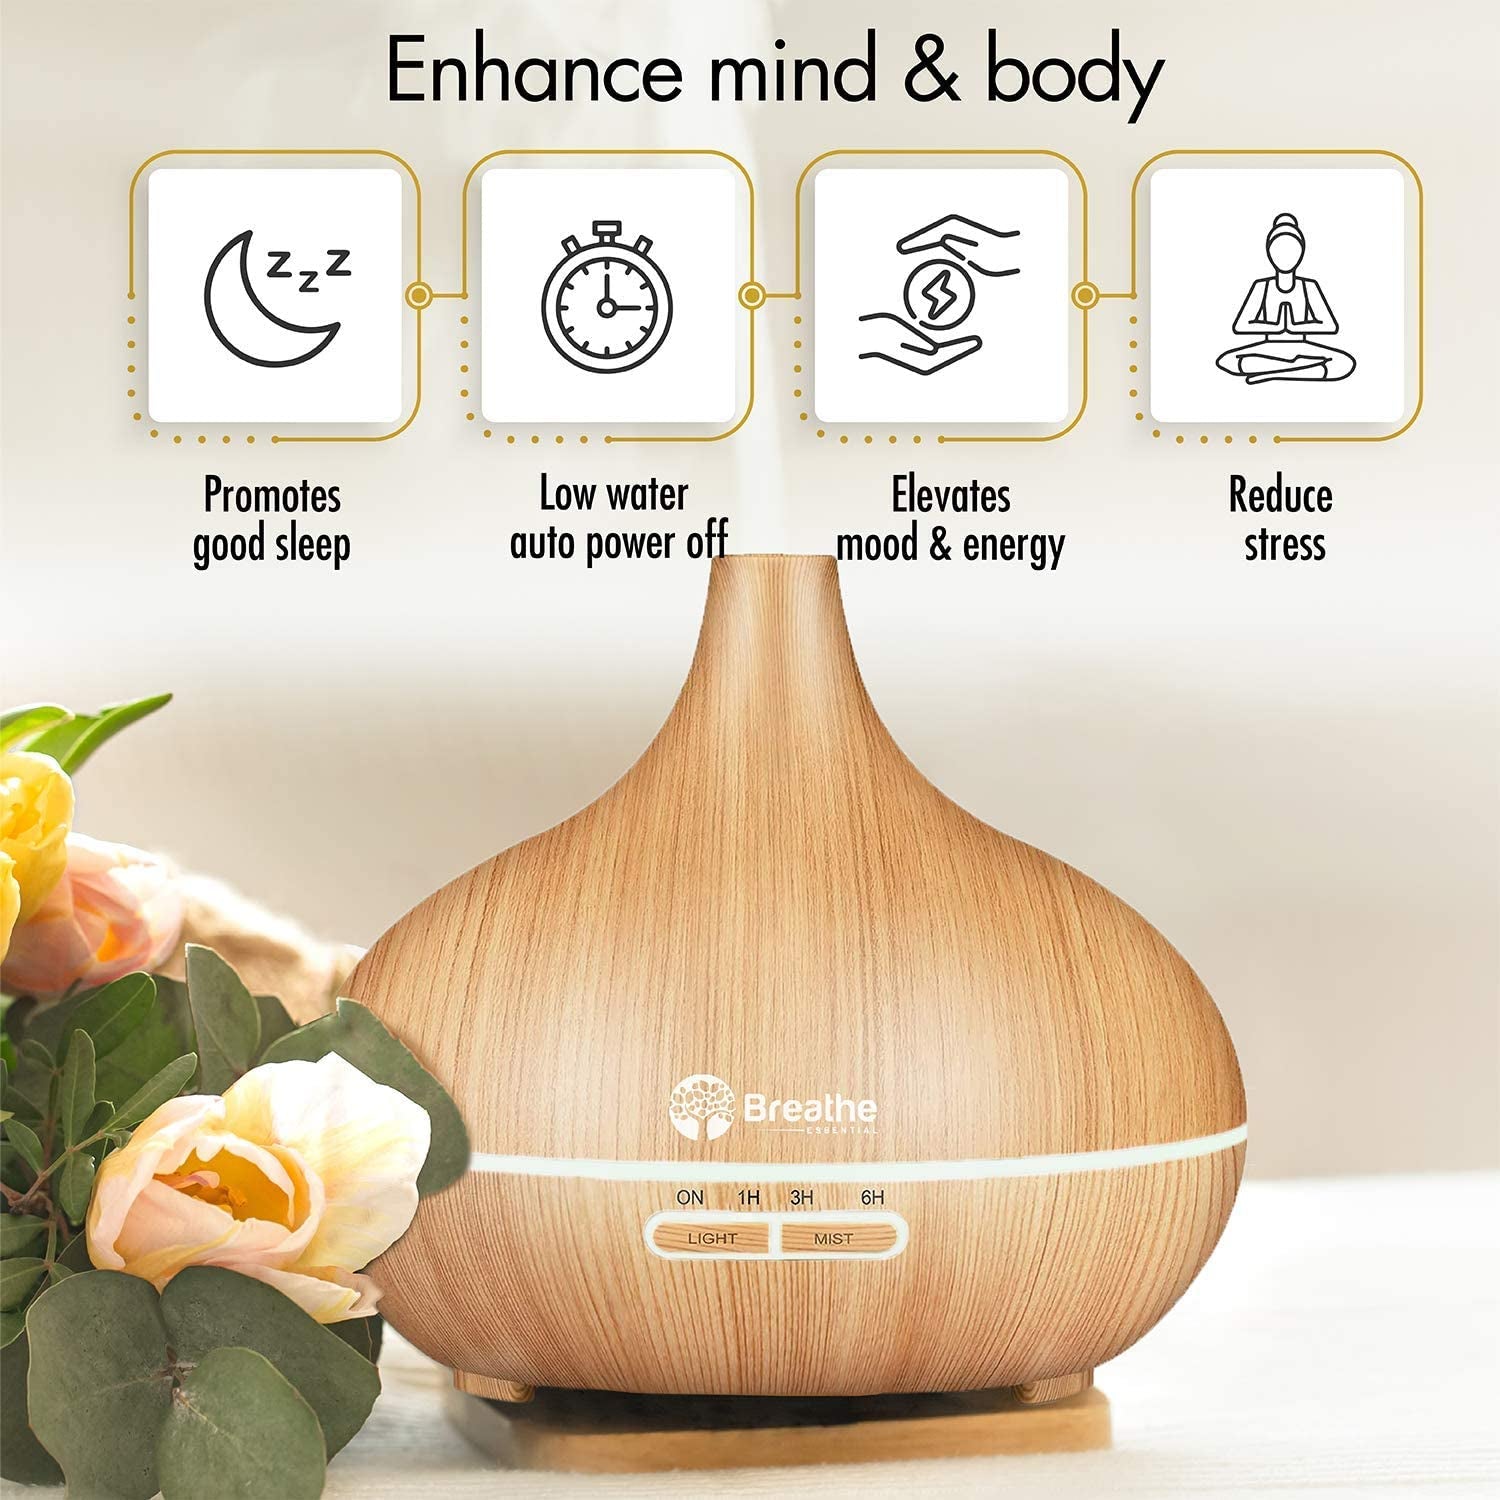 550ml Essential Oil Diffuser with Cleaning Kit, Measuring Cup, 18-Hour Runtime, 16 LED Light Settings, Auto Power Off - Natural Oak